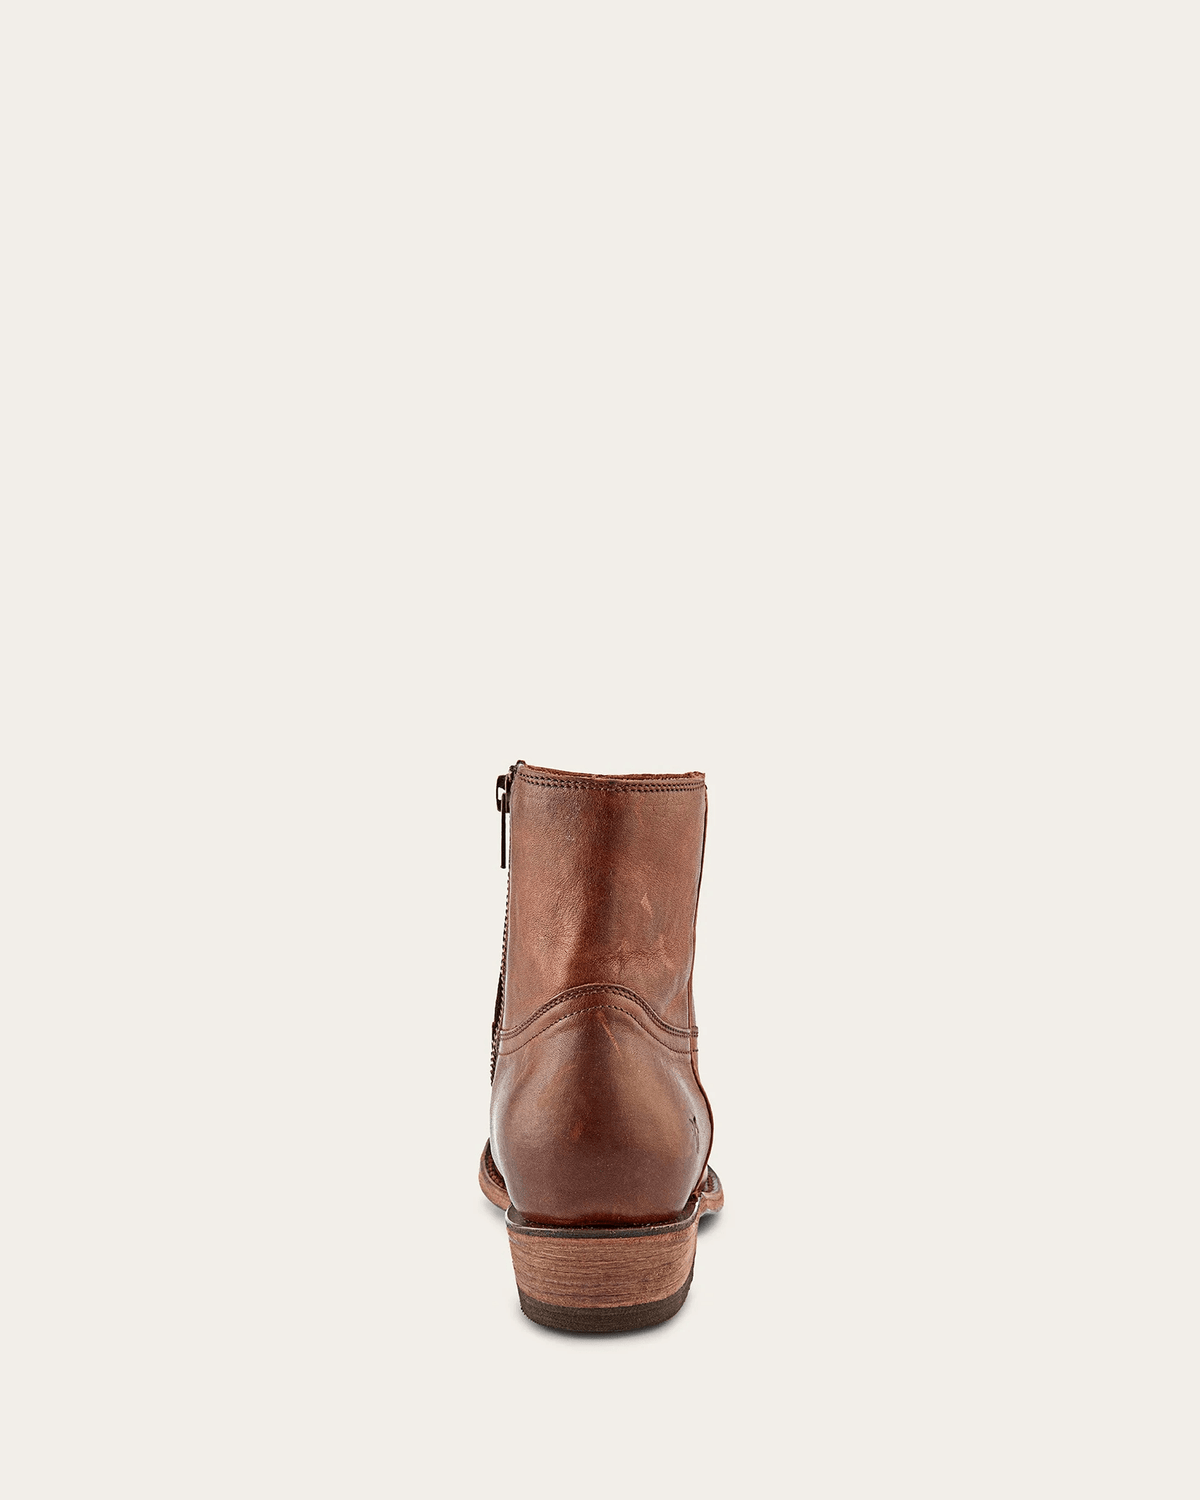 The Frye Company Shoes Billy Inside Zip in Redwood